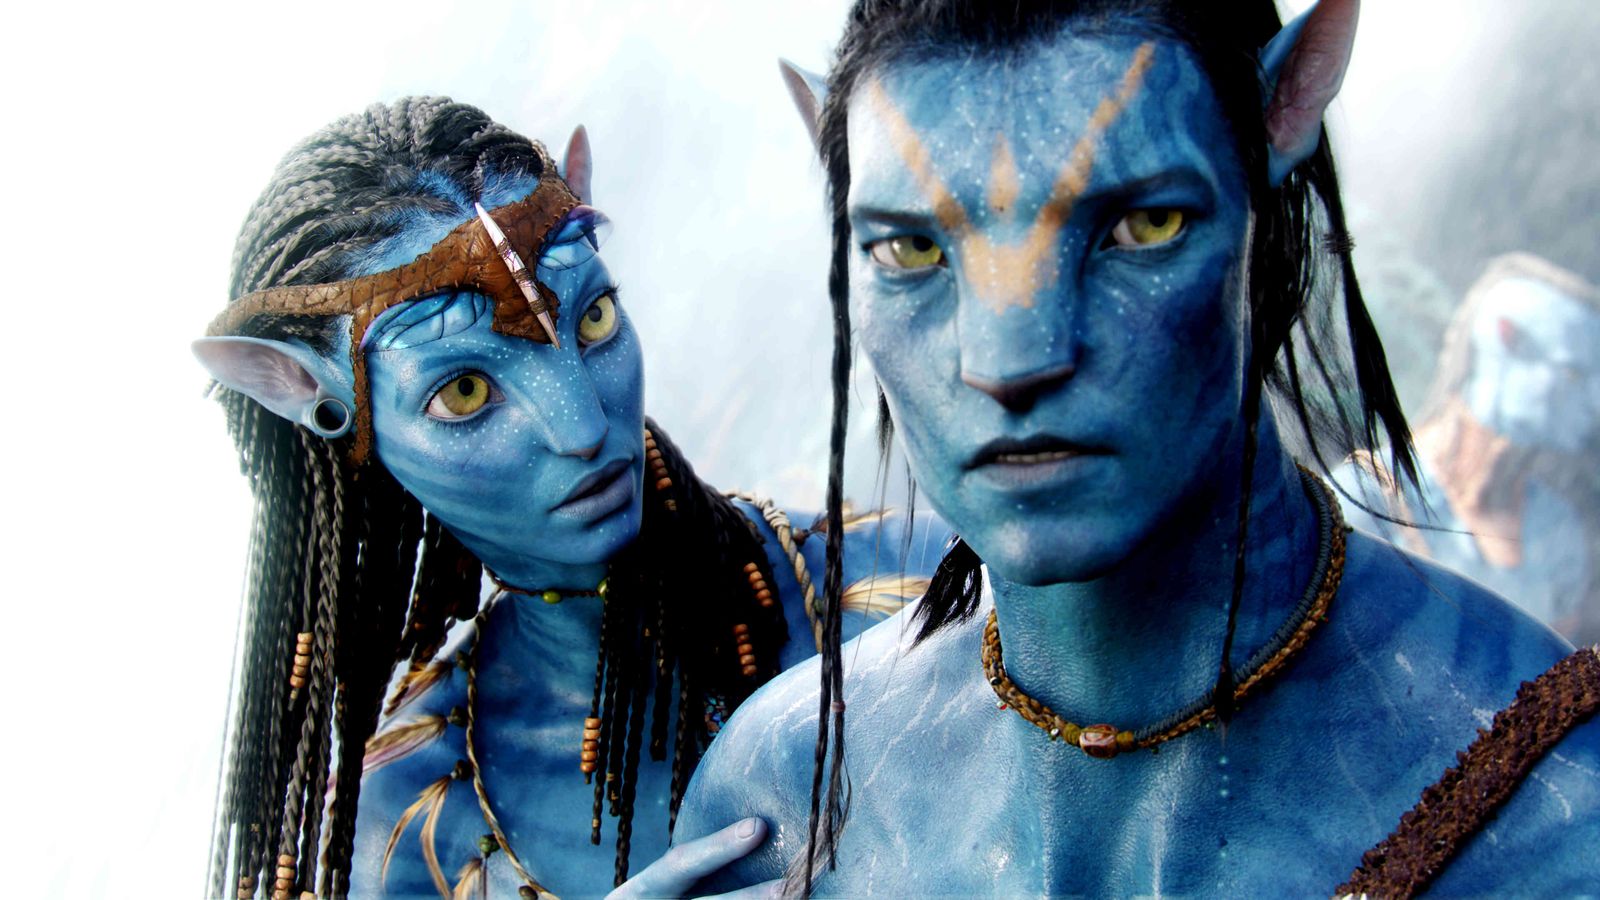 Avatar 2 Scheduled For A December 2018 Release?